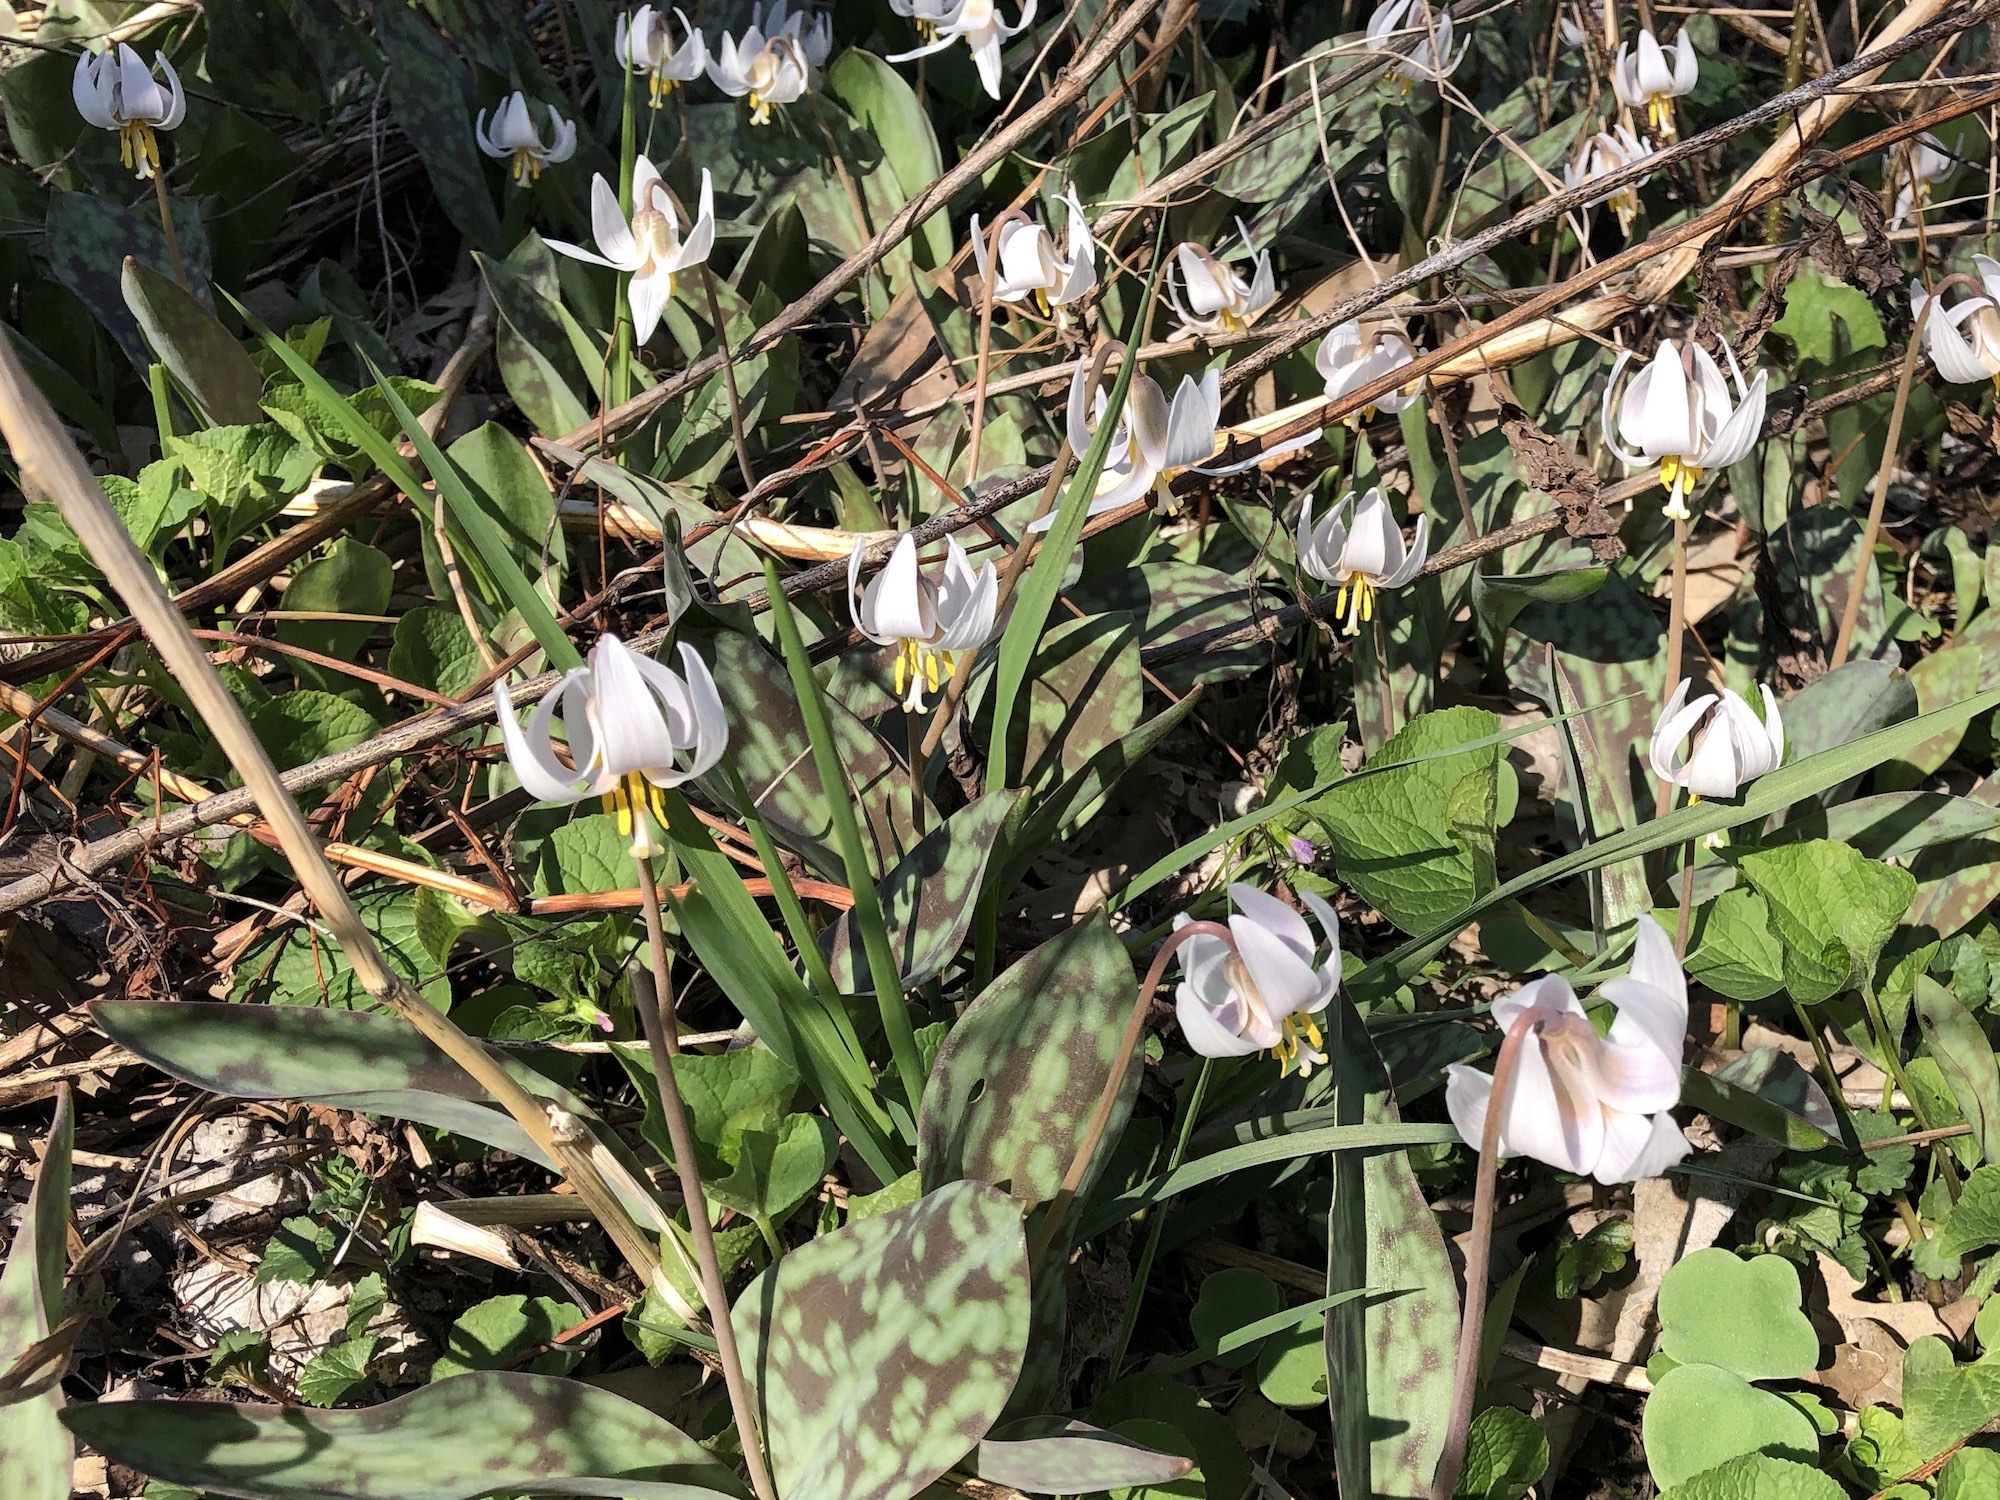 White Trout Lilies photo taken on April 21, 2019 in Madison, Wisconsin in the Oak Savanna and near the Council Ring.